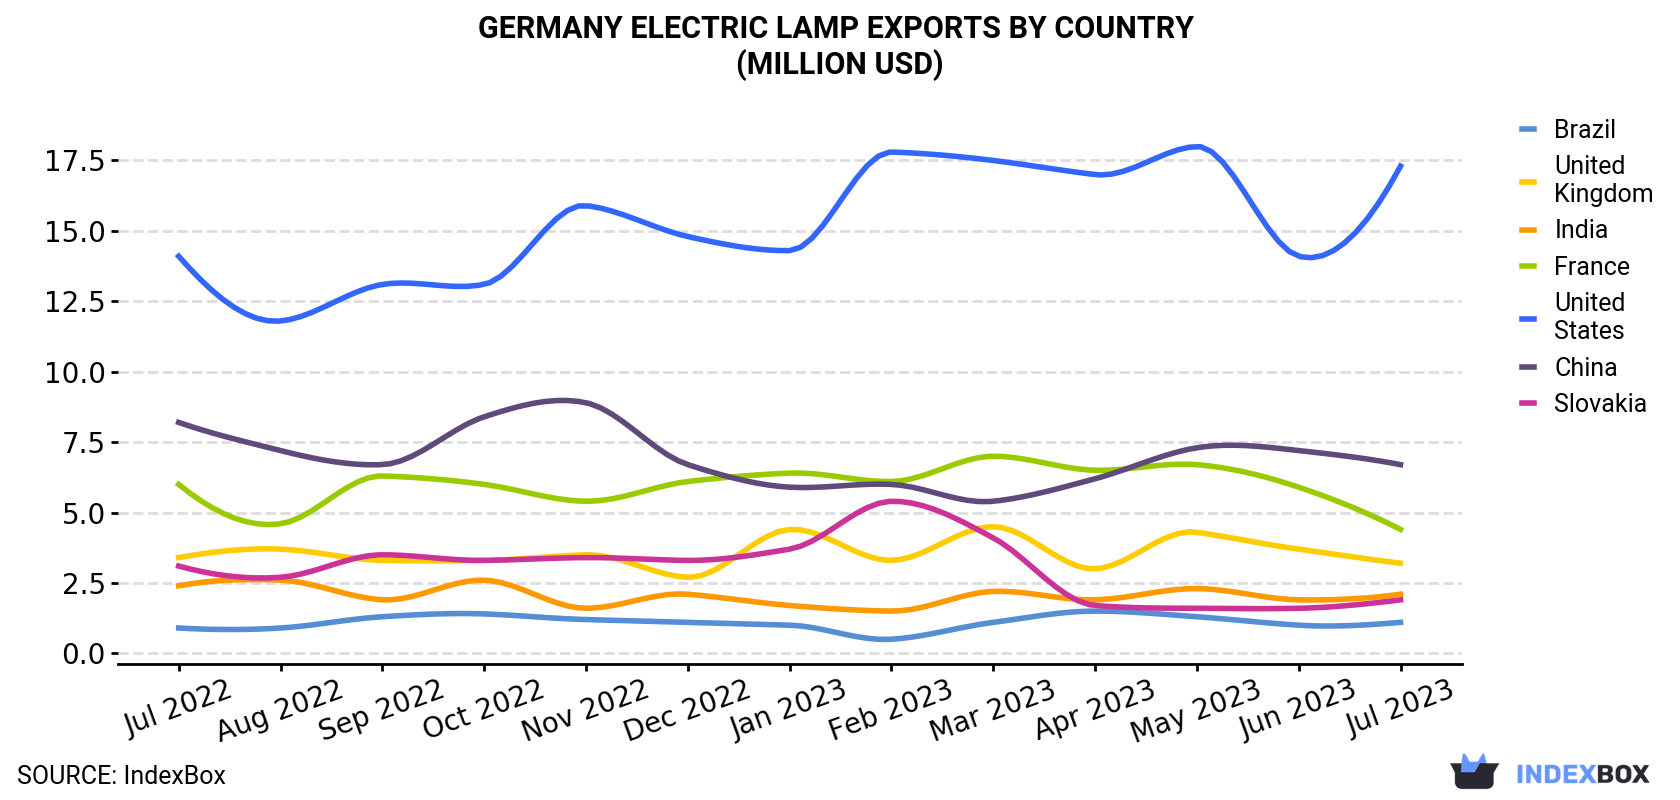 Germany Electric Lamp Exports By Country (Million USD)